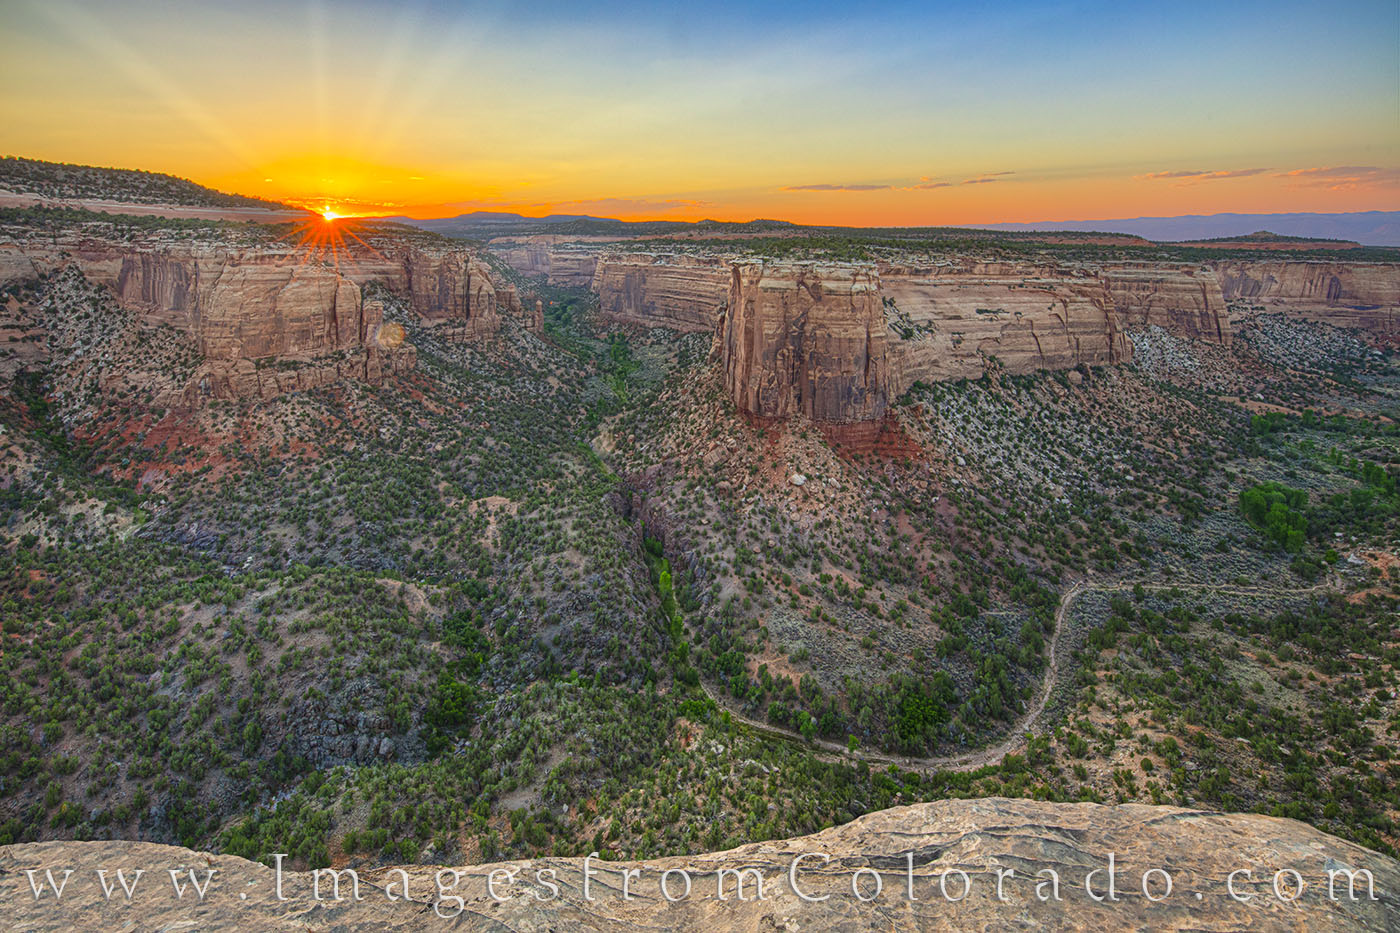 The last rays of sunshite streak up through distant clouds, bringing a glorious end of the day to Colorado National Monument...